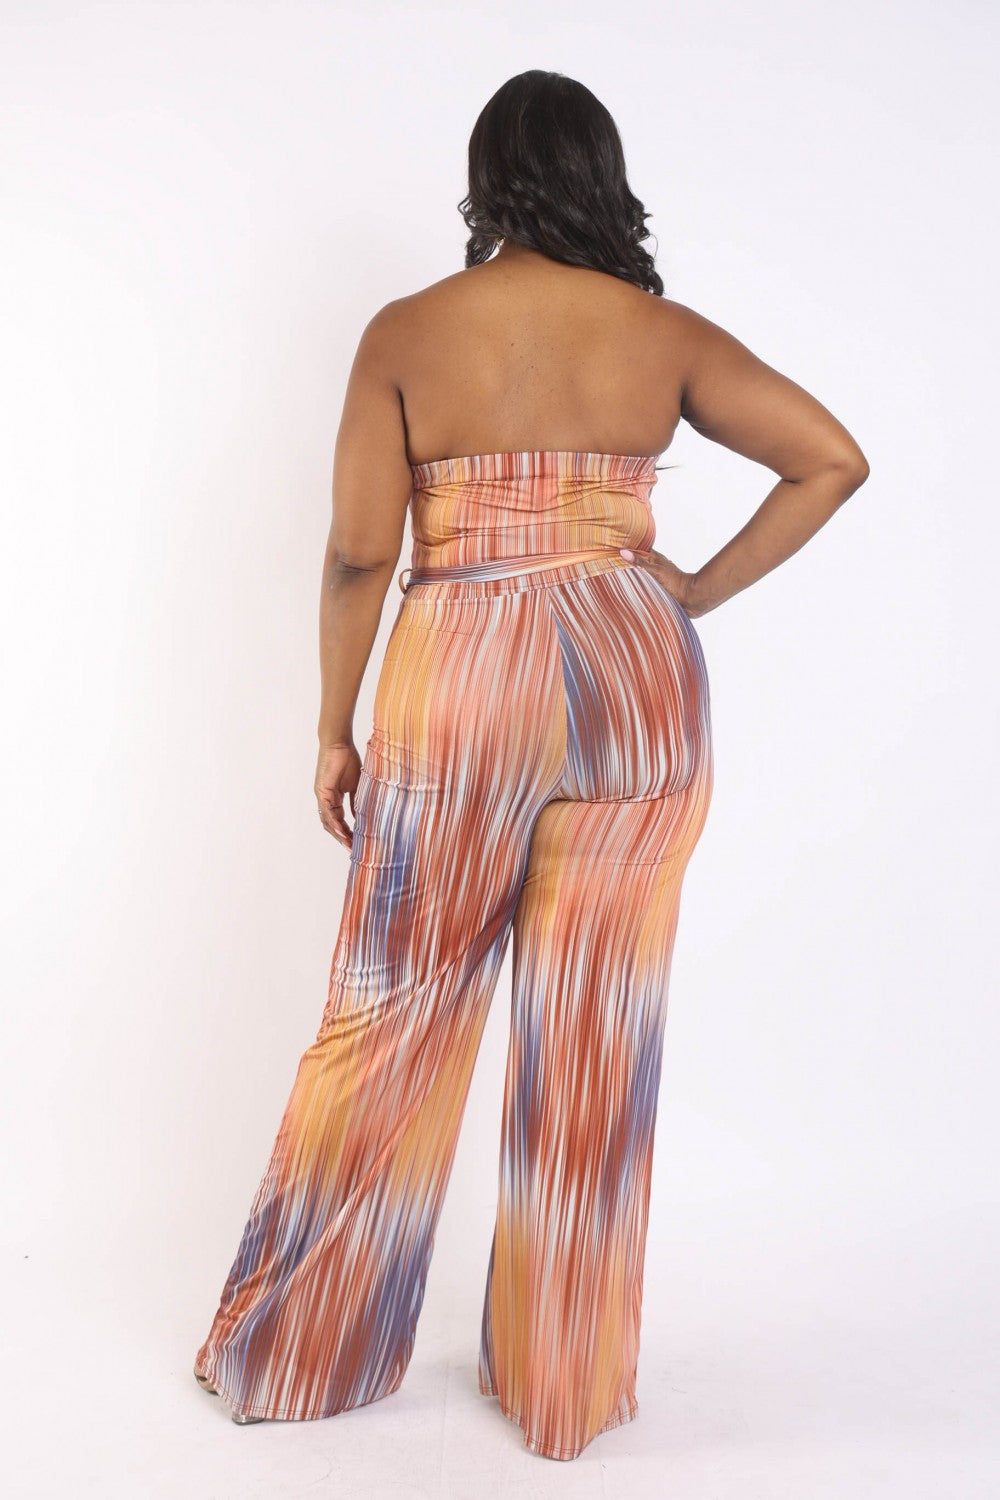 Plus Size Printed Tube Jumpsuit CCPRODUCTS, NEW ARRIVALS, PLUS SIZE, PLUS SIZE JUMPSUITS & ROMPERS Style Your Curves